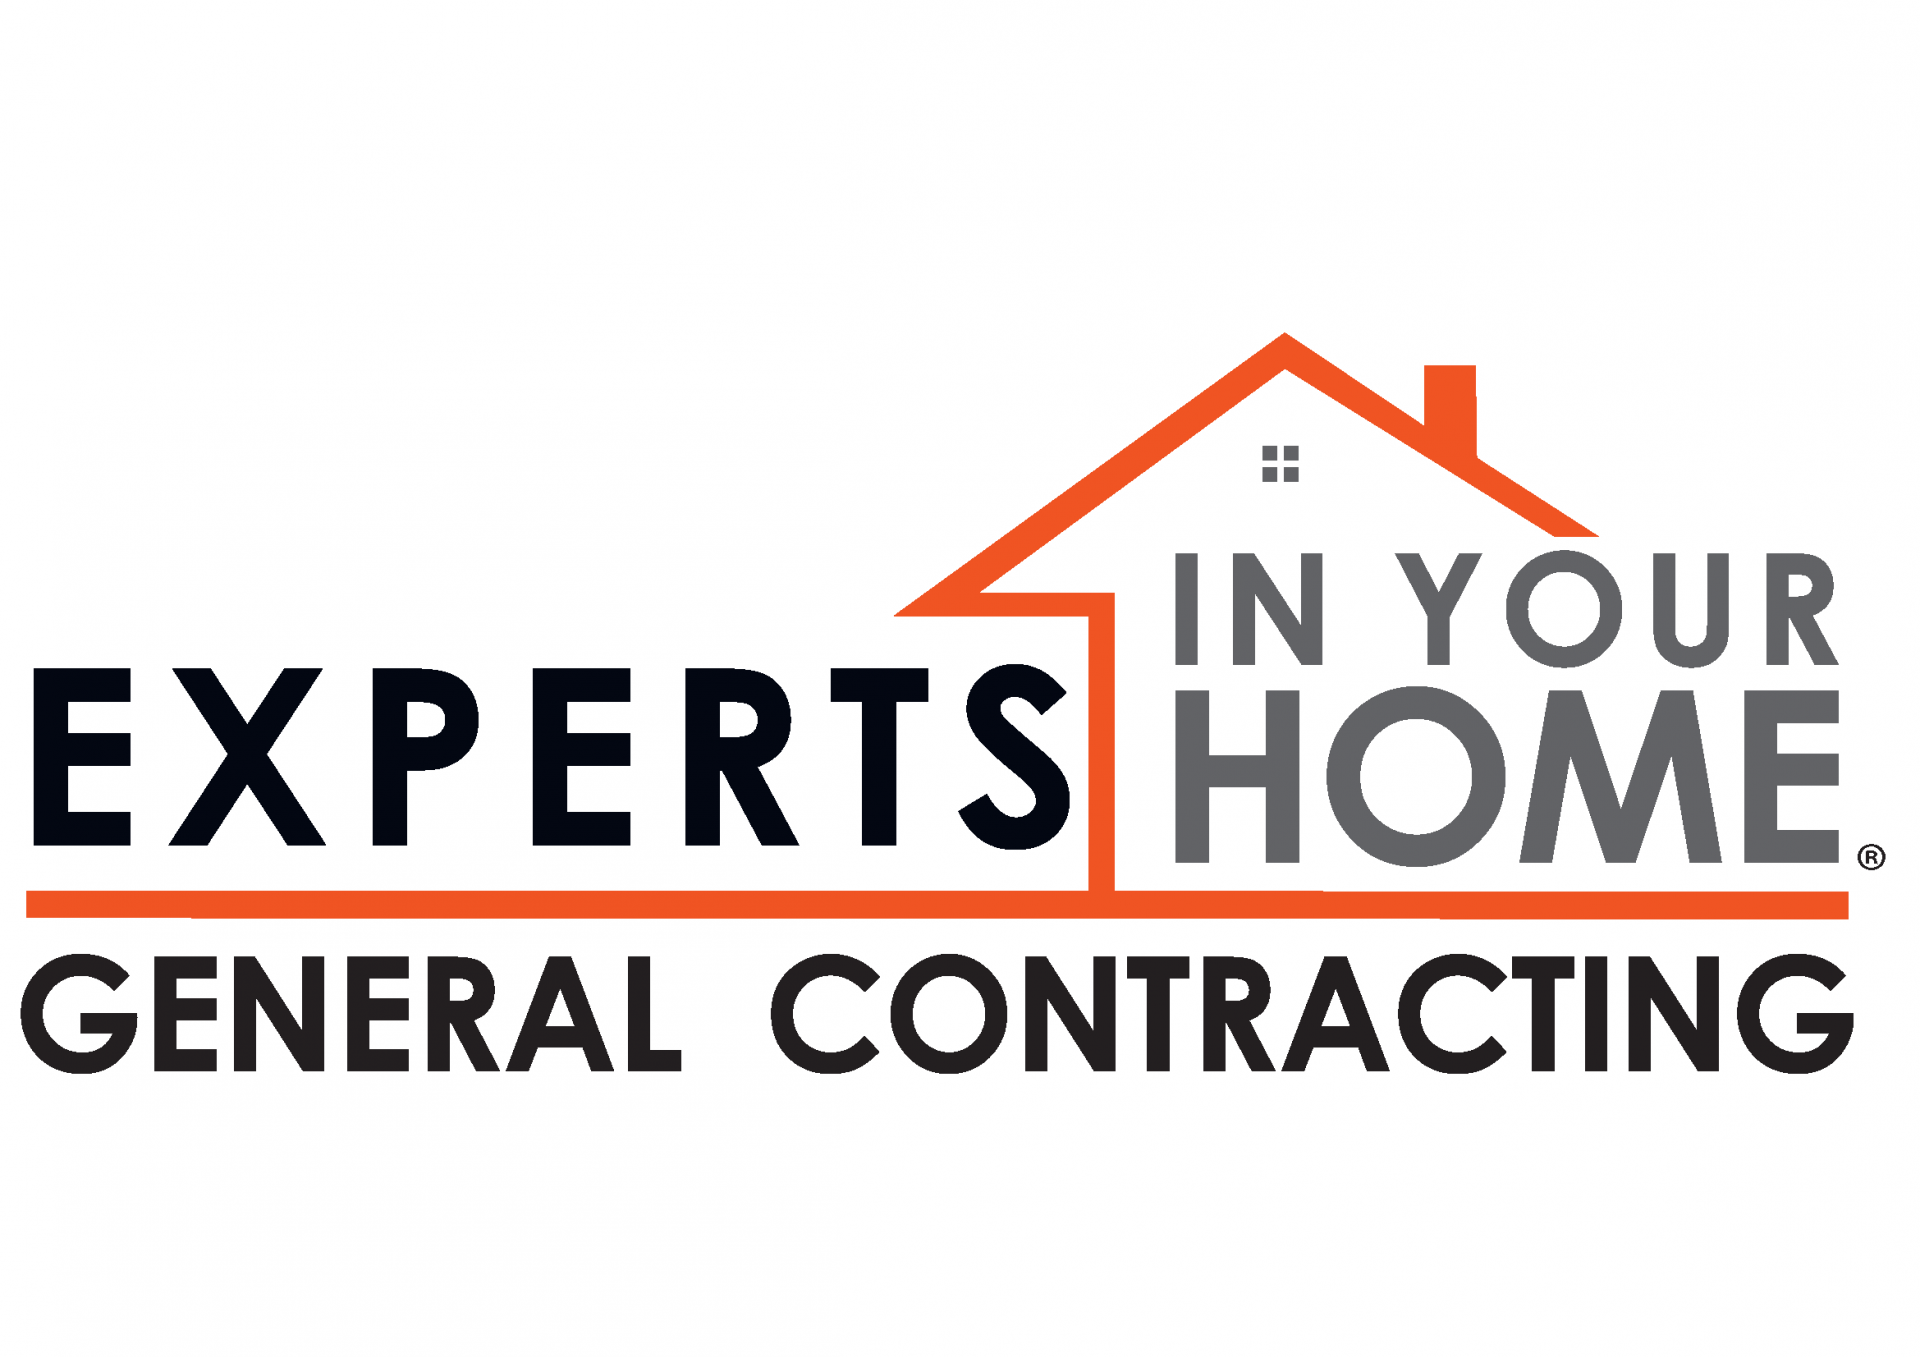 Experts In Your Home company logo